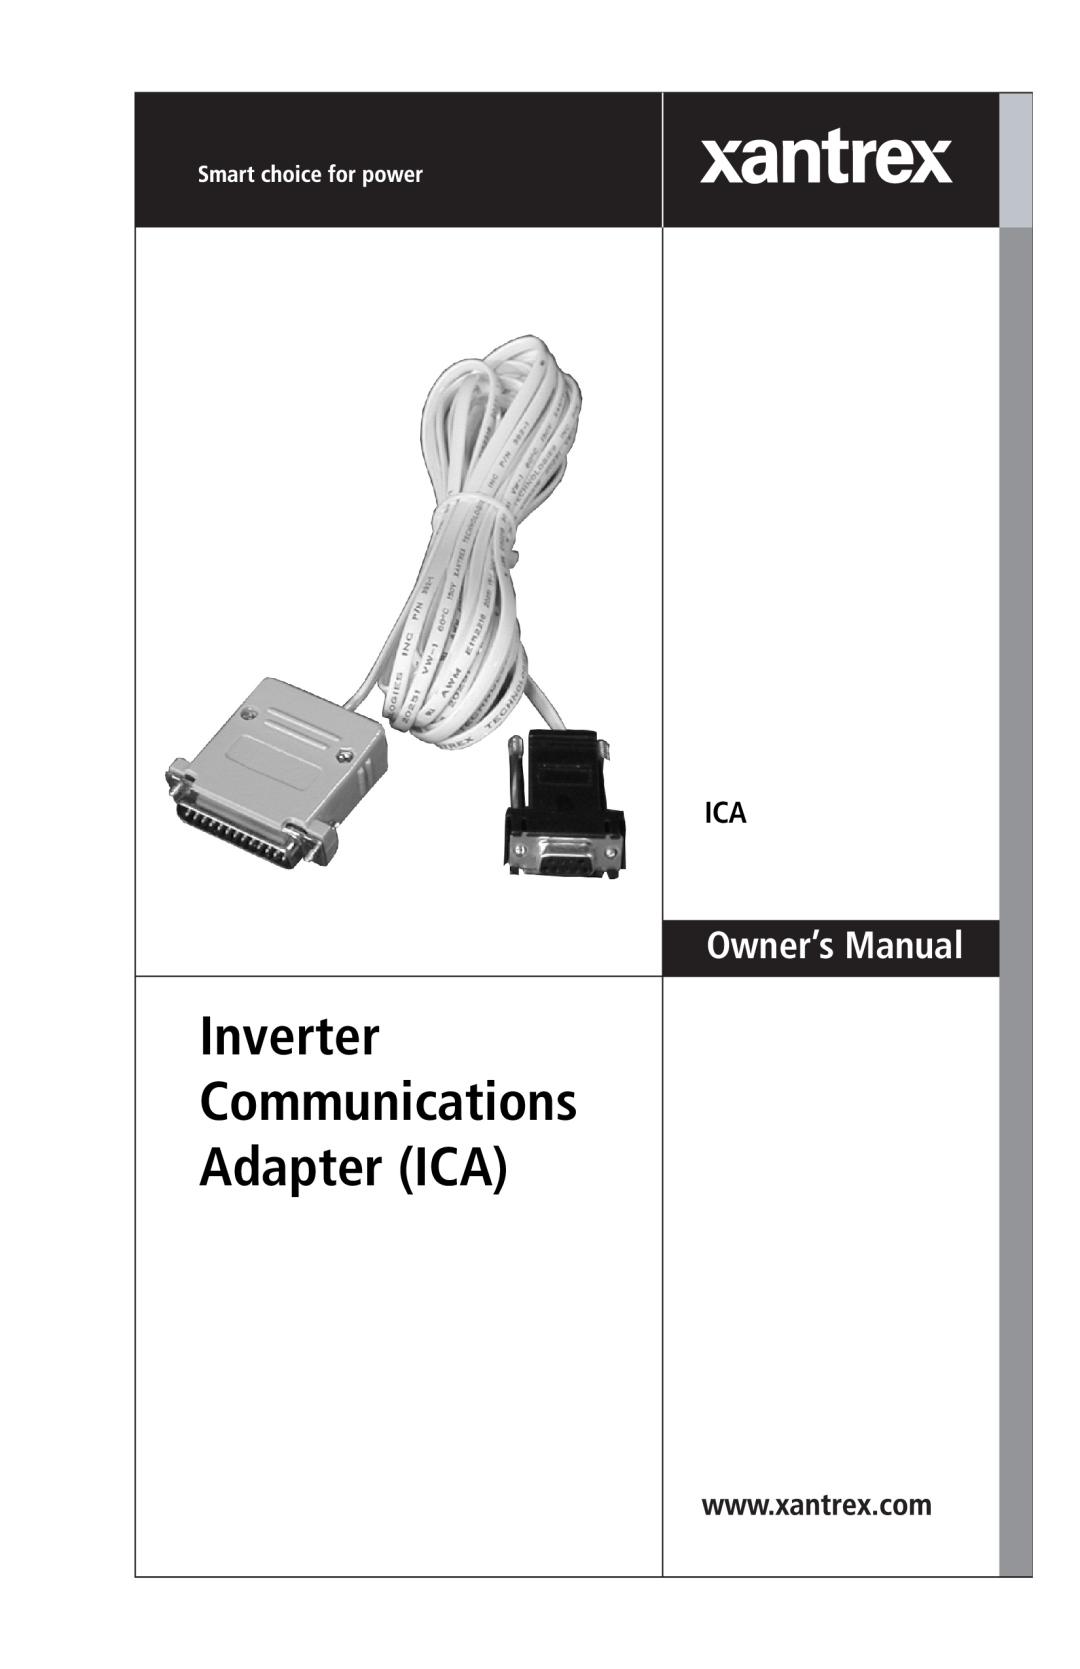 Xantrex Technology Inverter Communications Adapter manual Adapter ICA, Owner’s Manual 